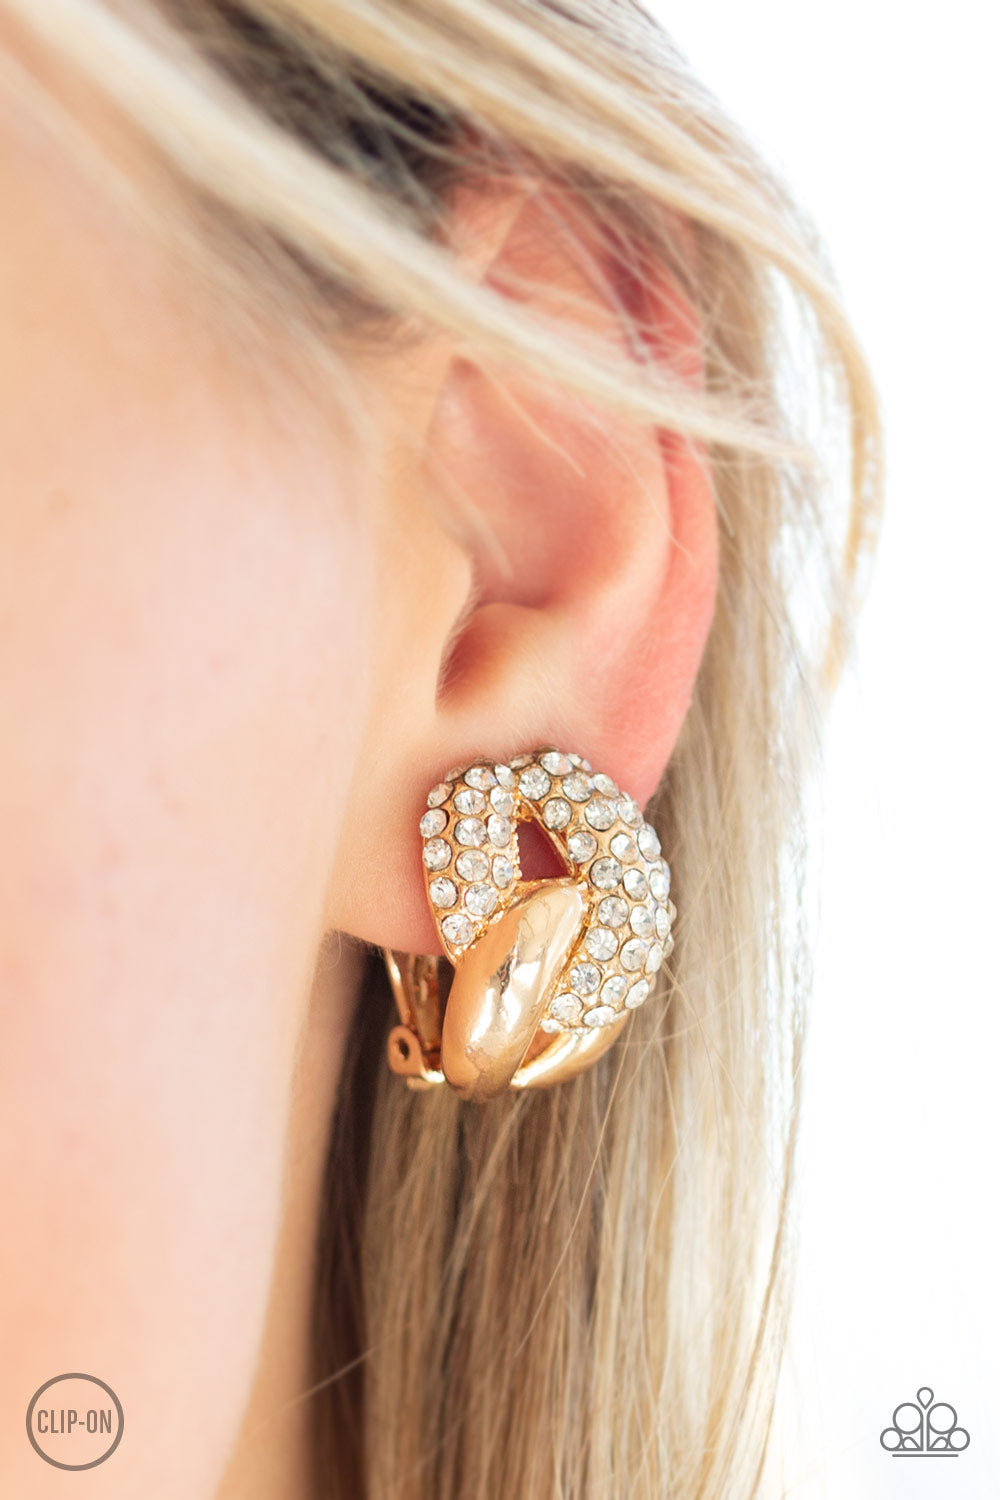 Definitely Date Night - Gold Item #E341 A white rhinestone encrusted link and glistening gold link connect into a bold frame for a refined look. Earring attaches to a standard clip-on fitting. All Paparazzi Accessories are lead free and nickel free!  Sold as one pair of clip-on earrings.